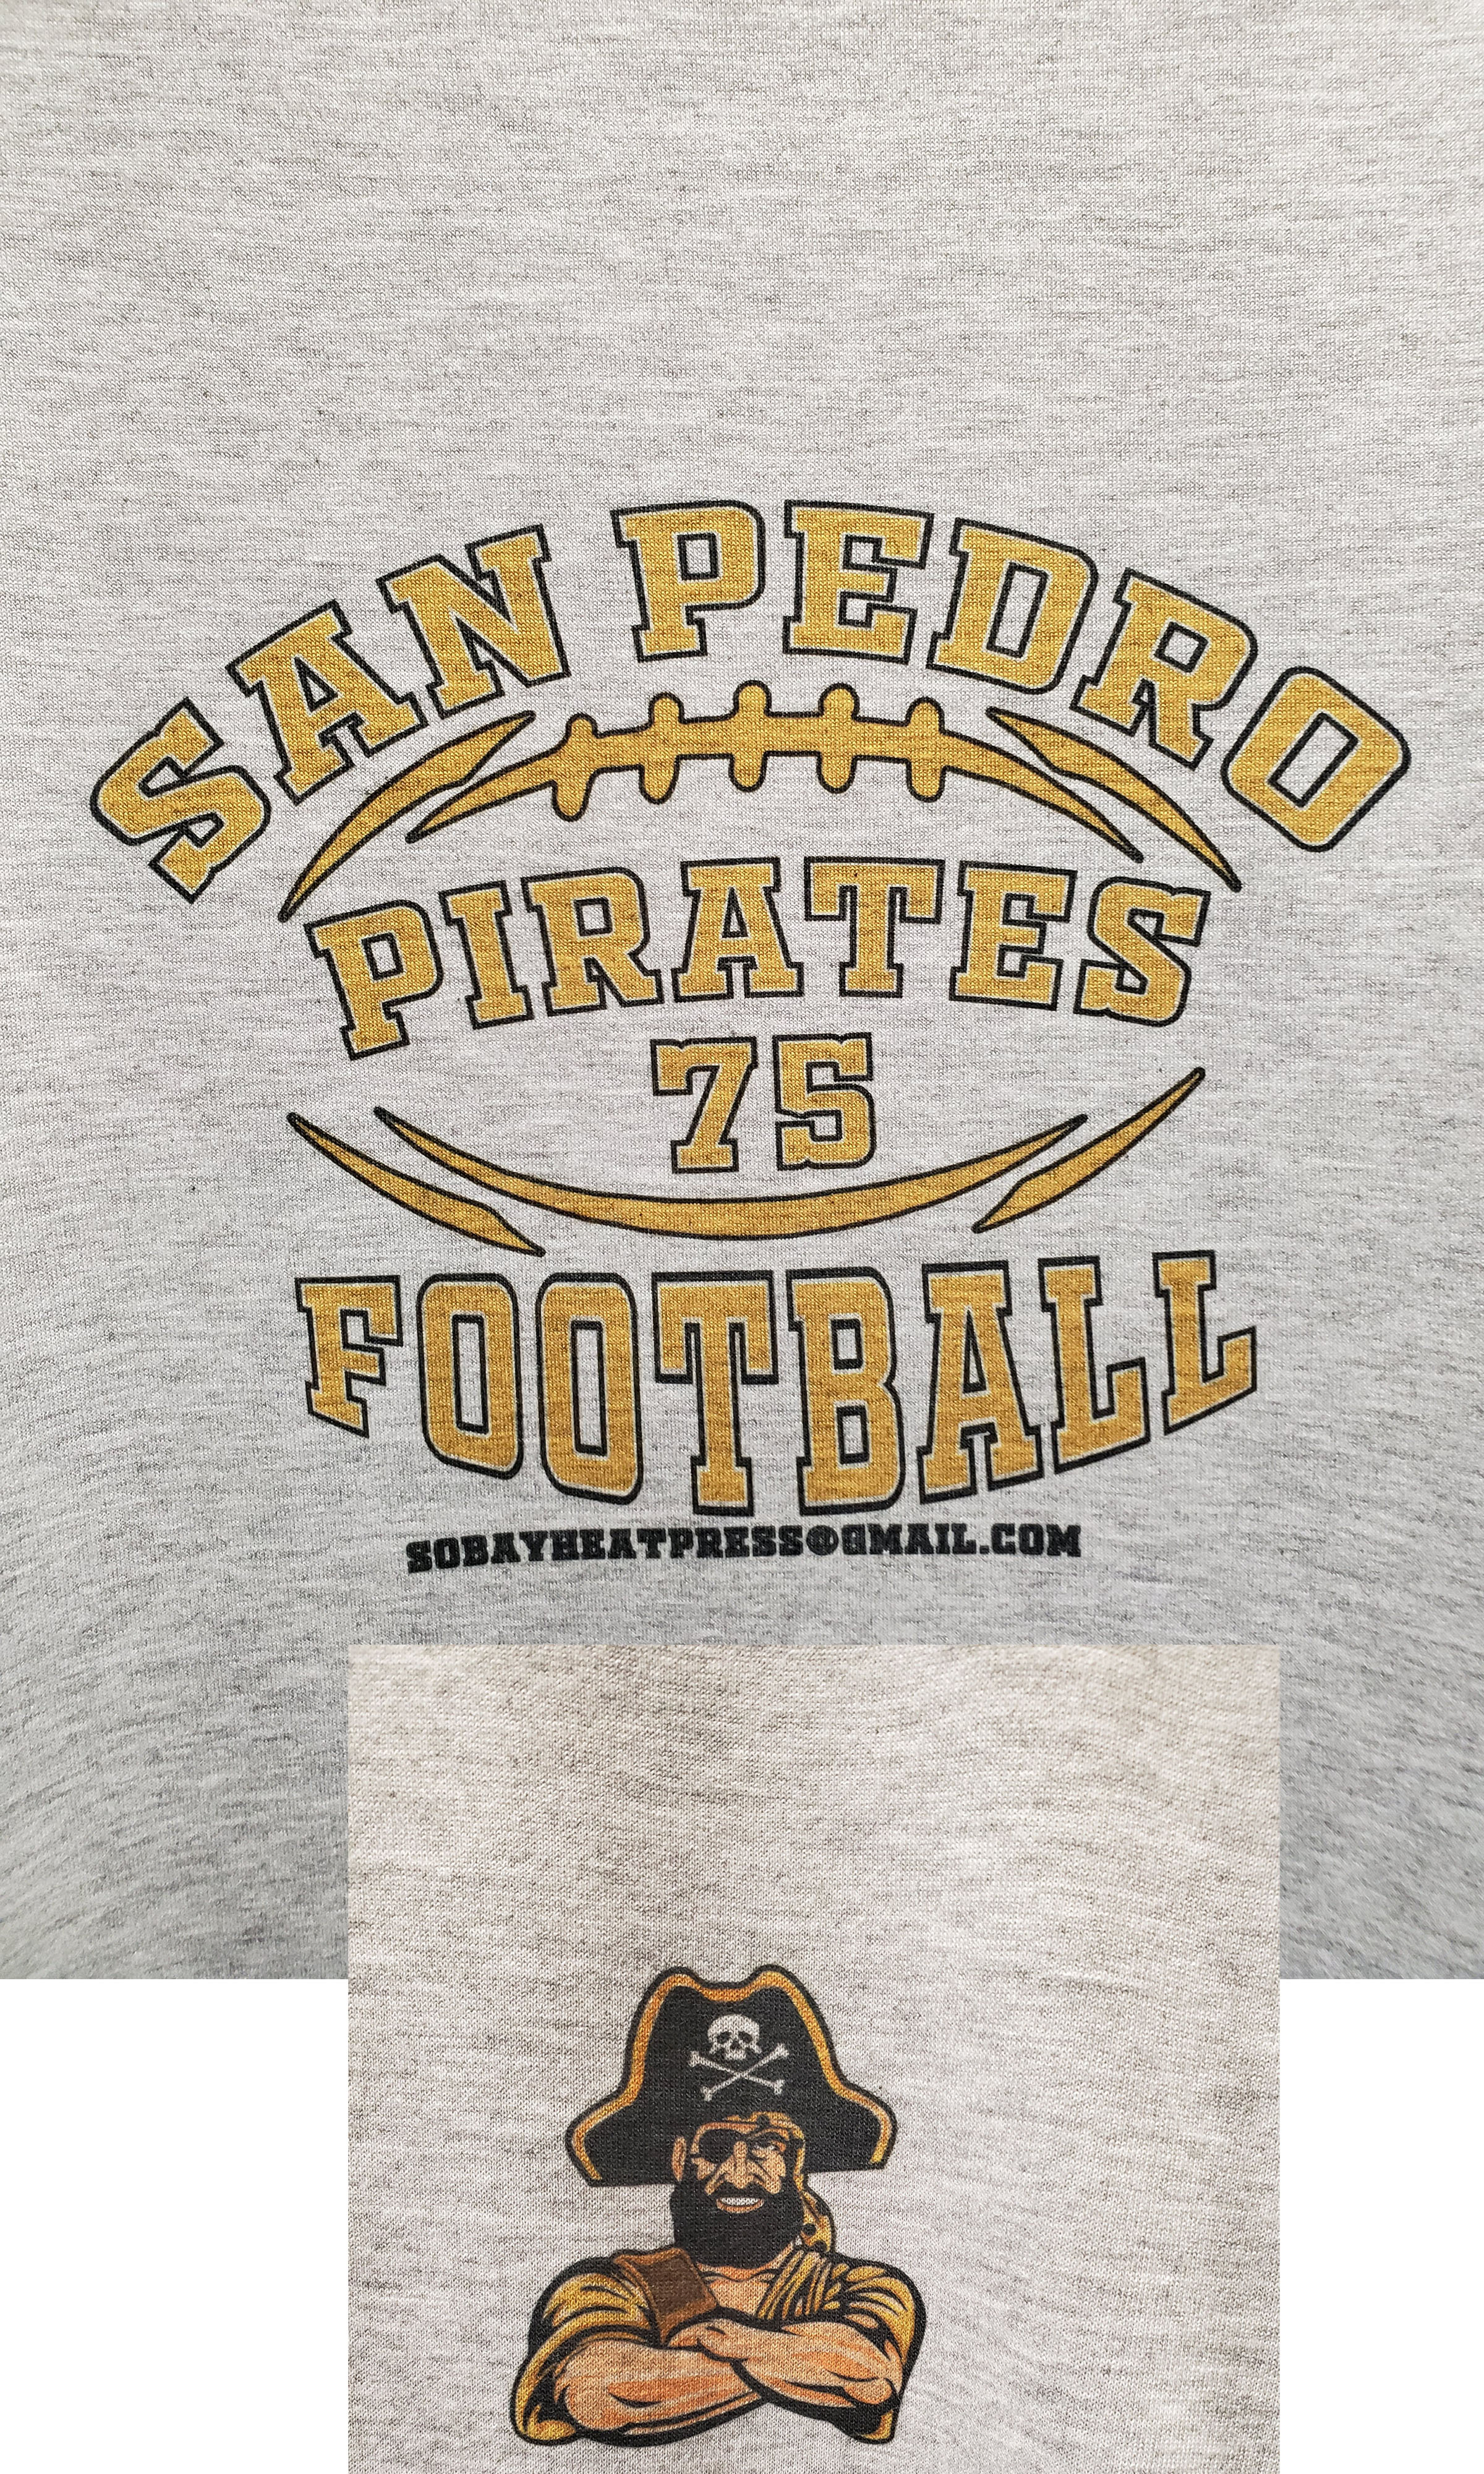 High School Football Support Tee shirt made with sublimation printing